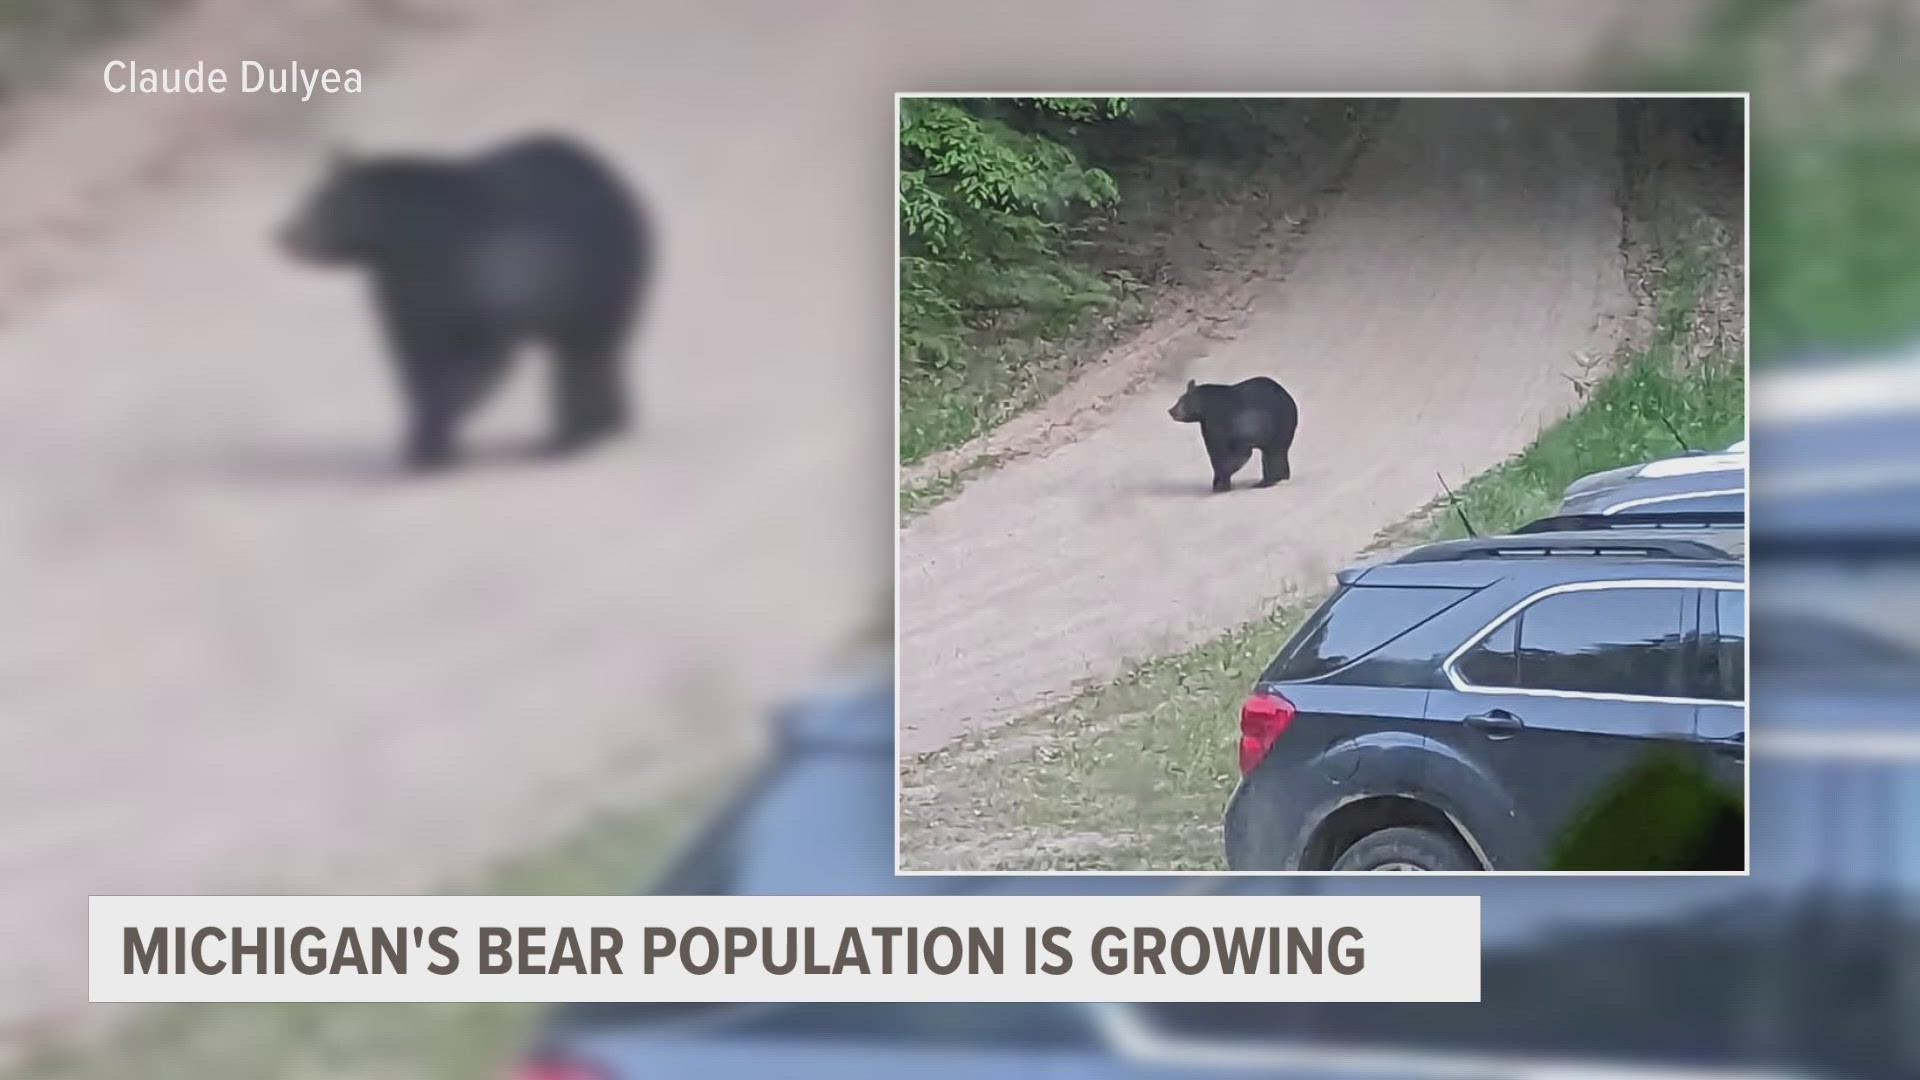 13 ON YOUR SIDE received reports of potential bear cub sightings in Spring Lake, so we did some digging.